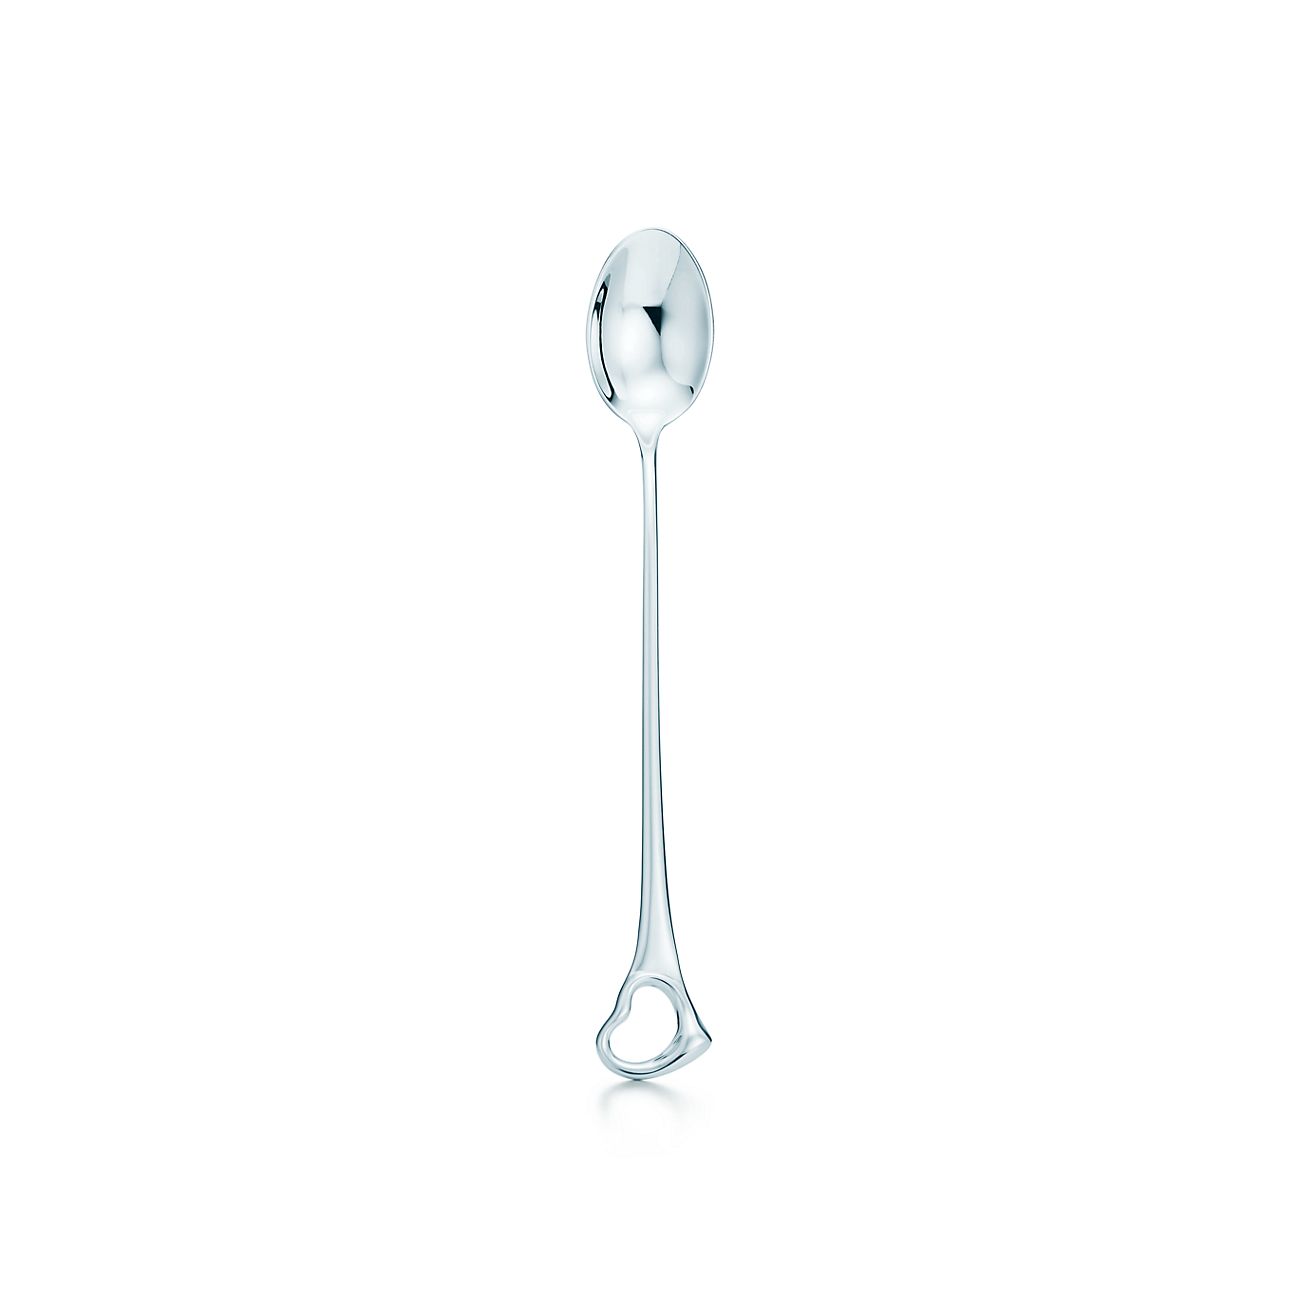 tiffany sterling silver baby spoon